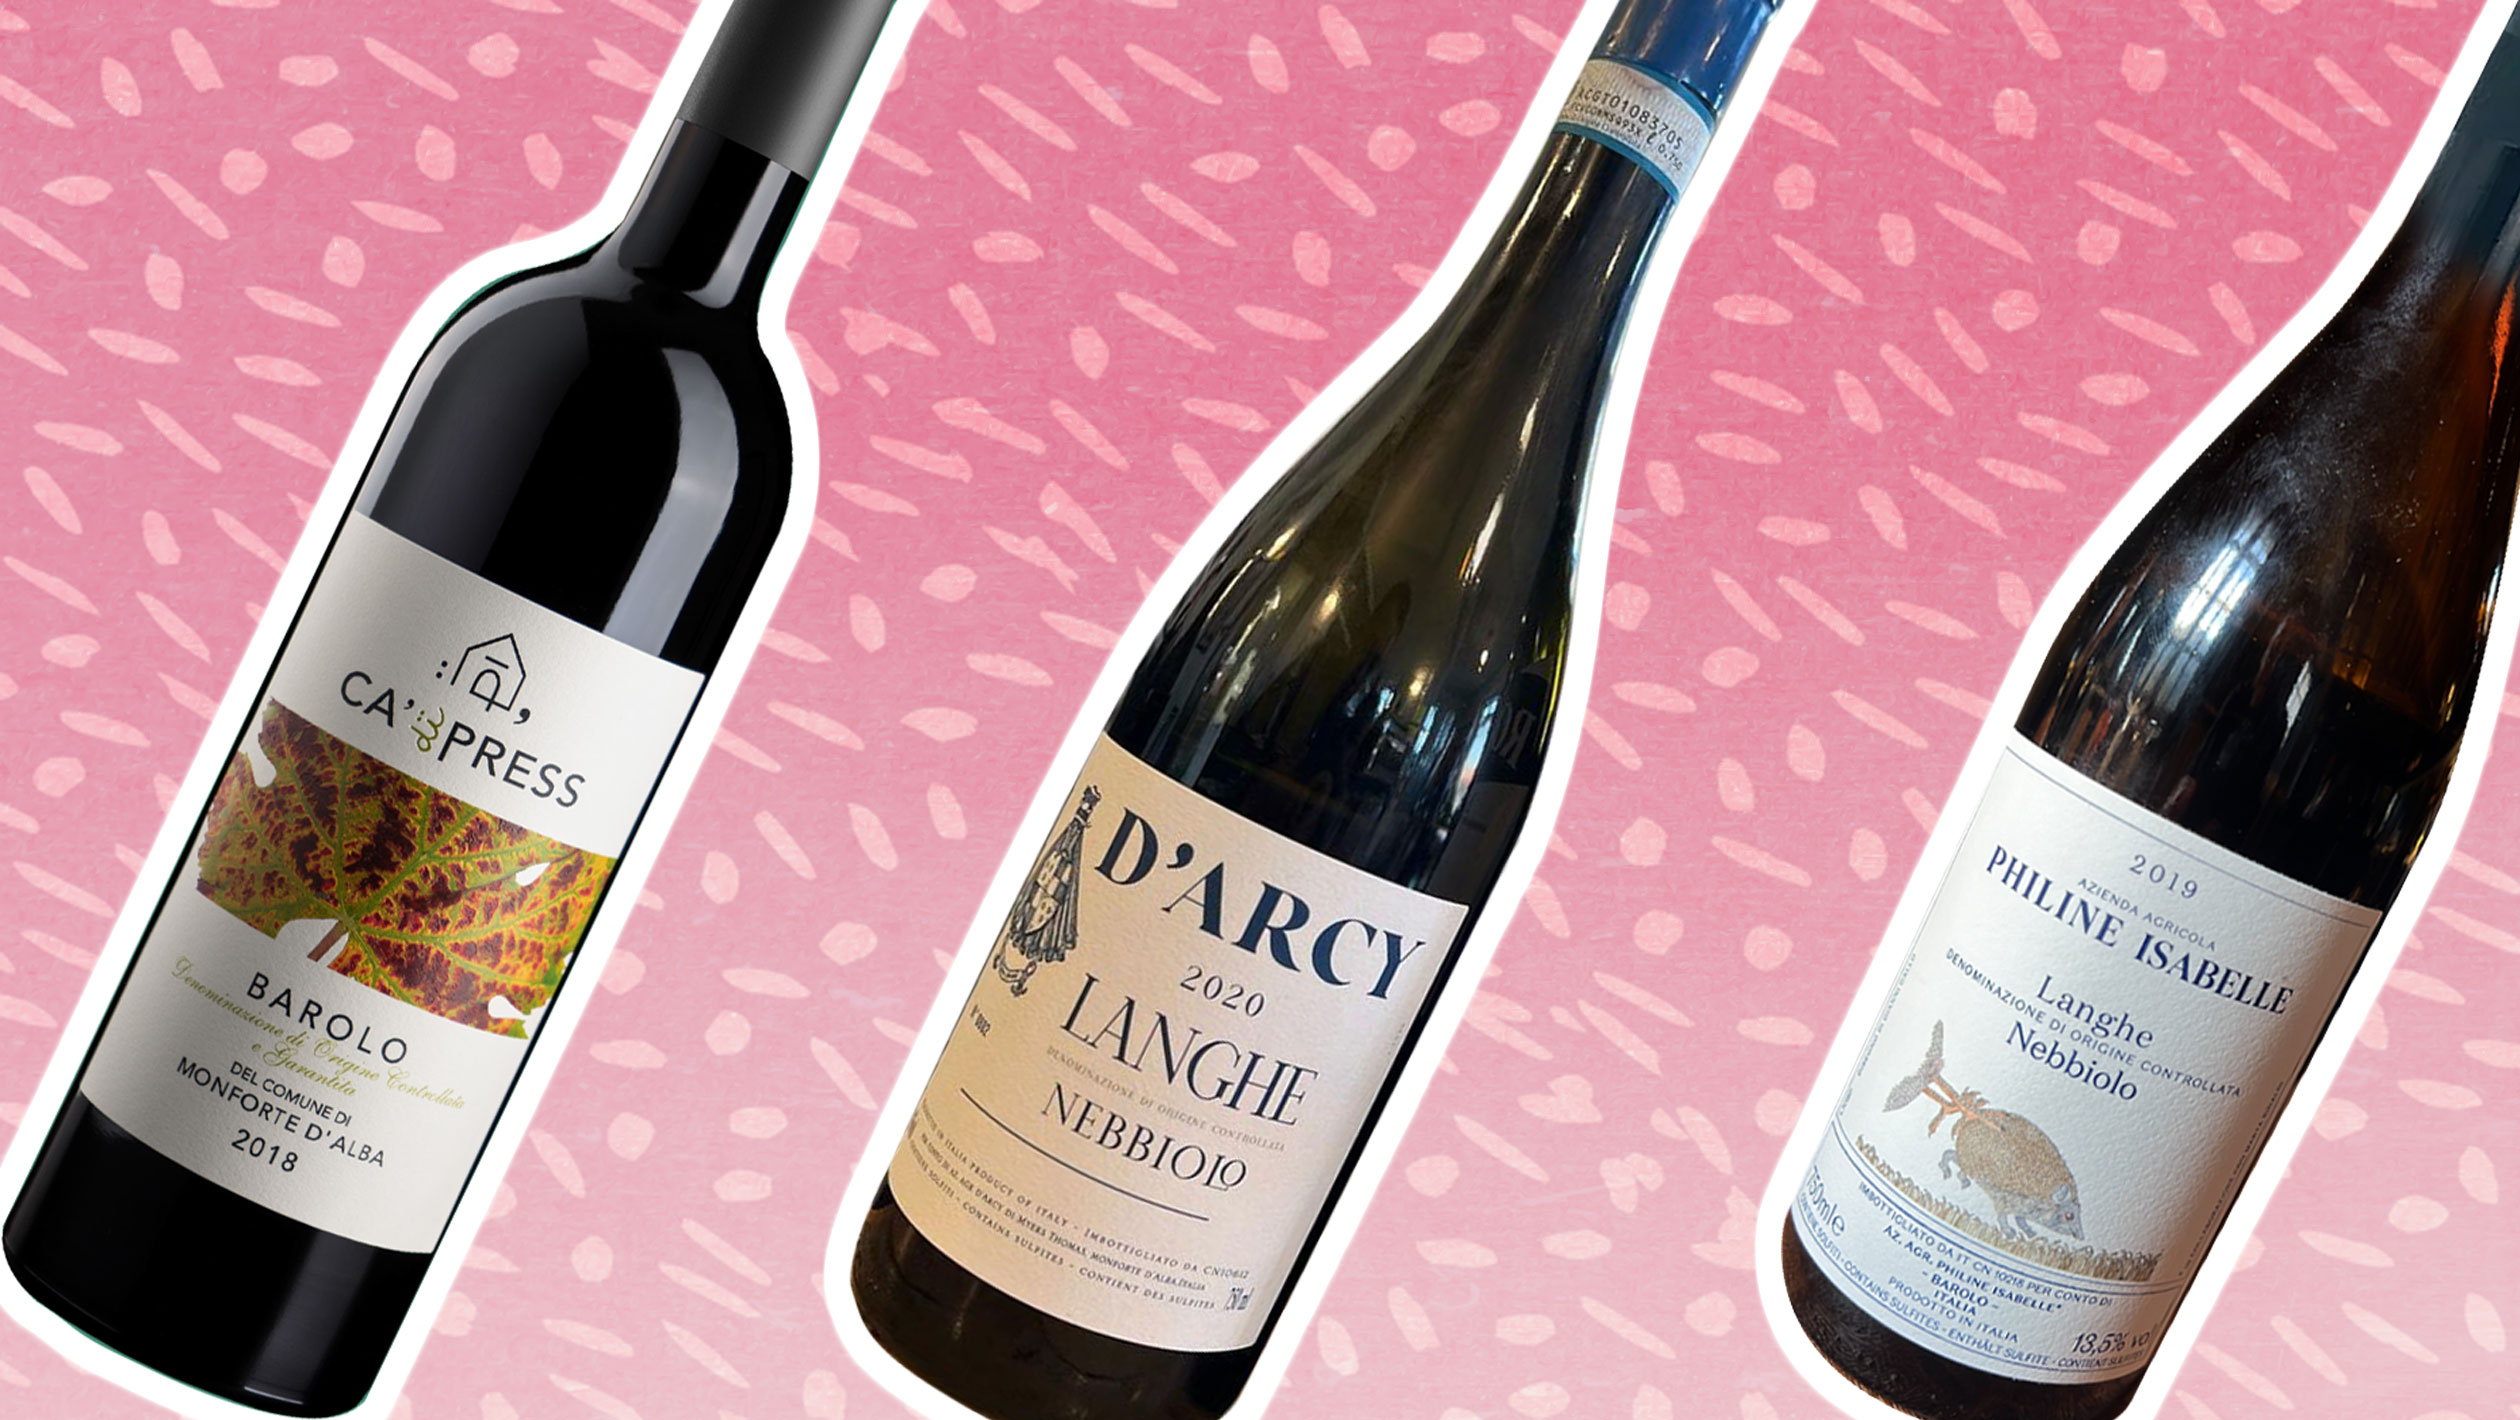 A New of Changing the Face of Barolo | SevenFifty Daily